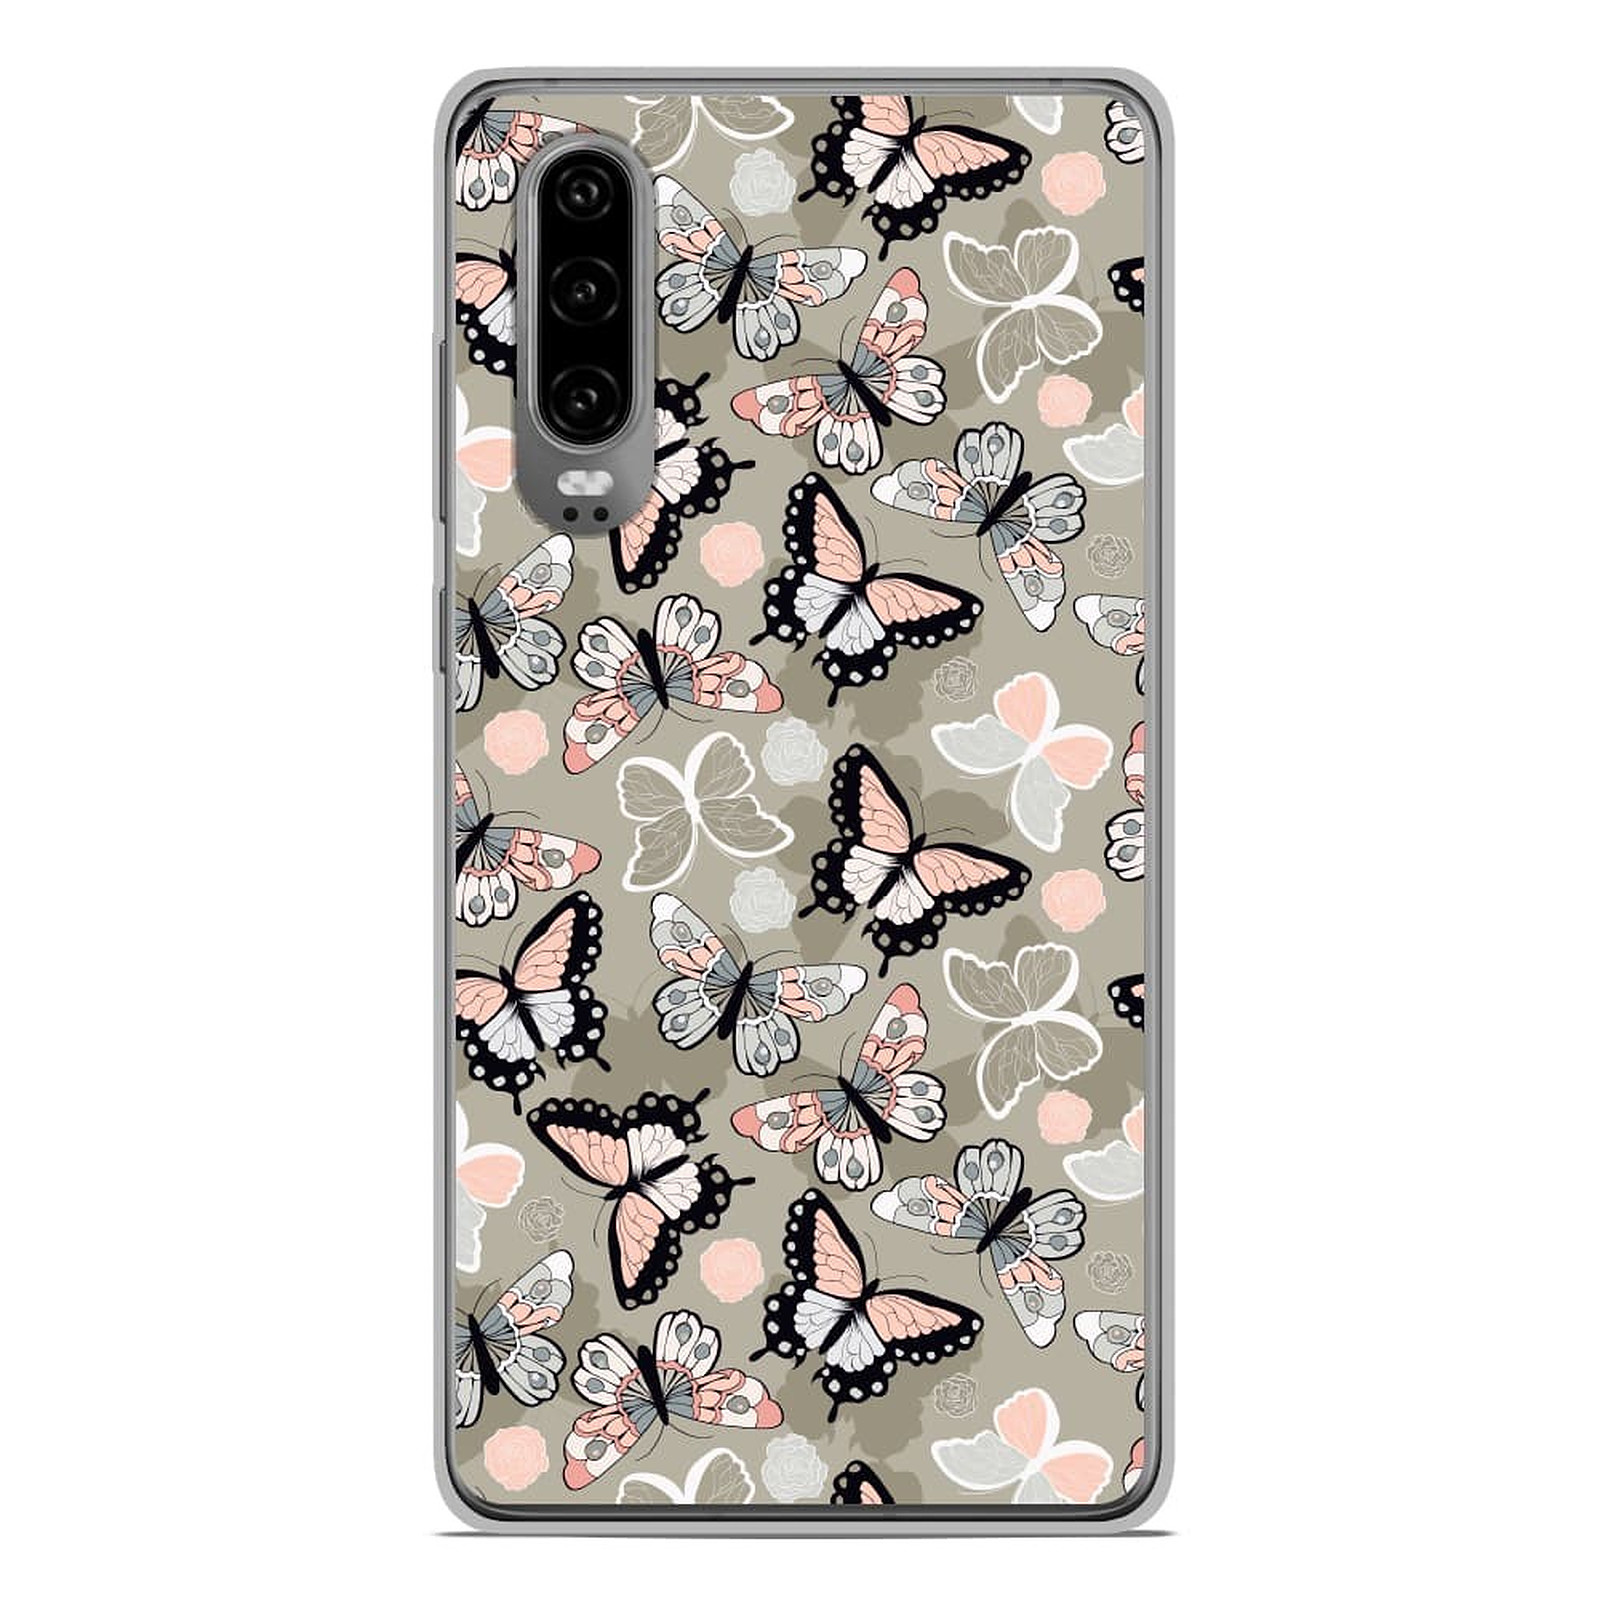 1001 Coques Coque silicone gel Huawei P30 motif Papillons Vintage - Coque telephone 1001Coques